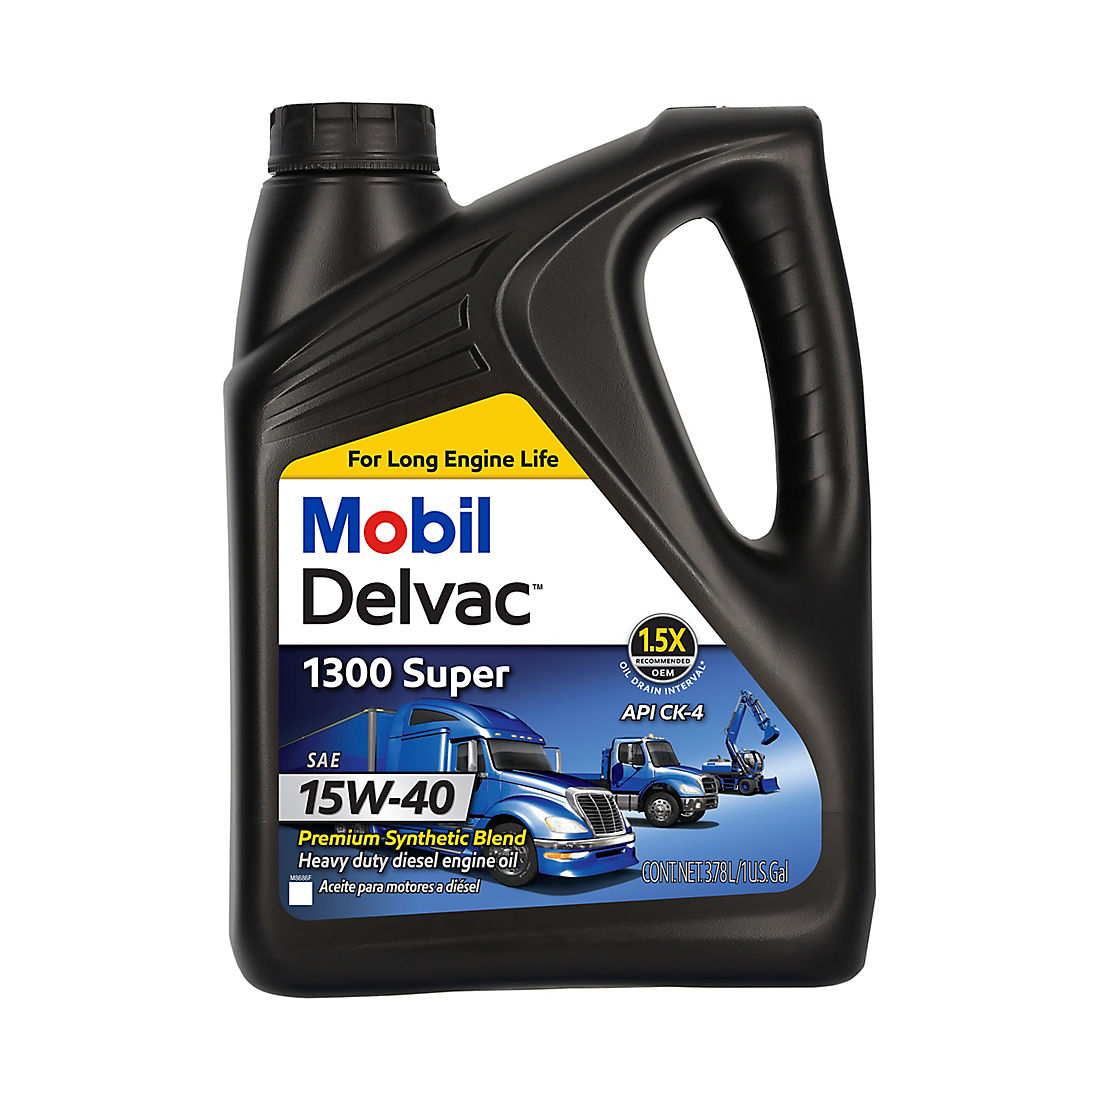 Mobil Delvac 10w 40 Diesel. Mobil 10w 40 Synthetic engine Oil. Мобил Делвак 10w 50. Oil Motor SAE 15w40. Масло мобил делвак 10w 40